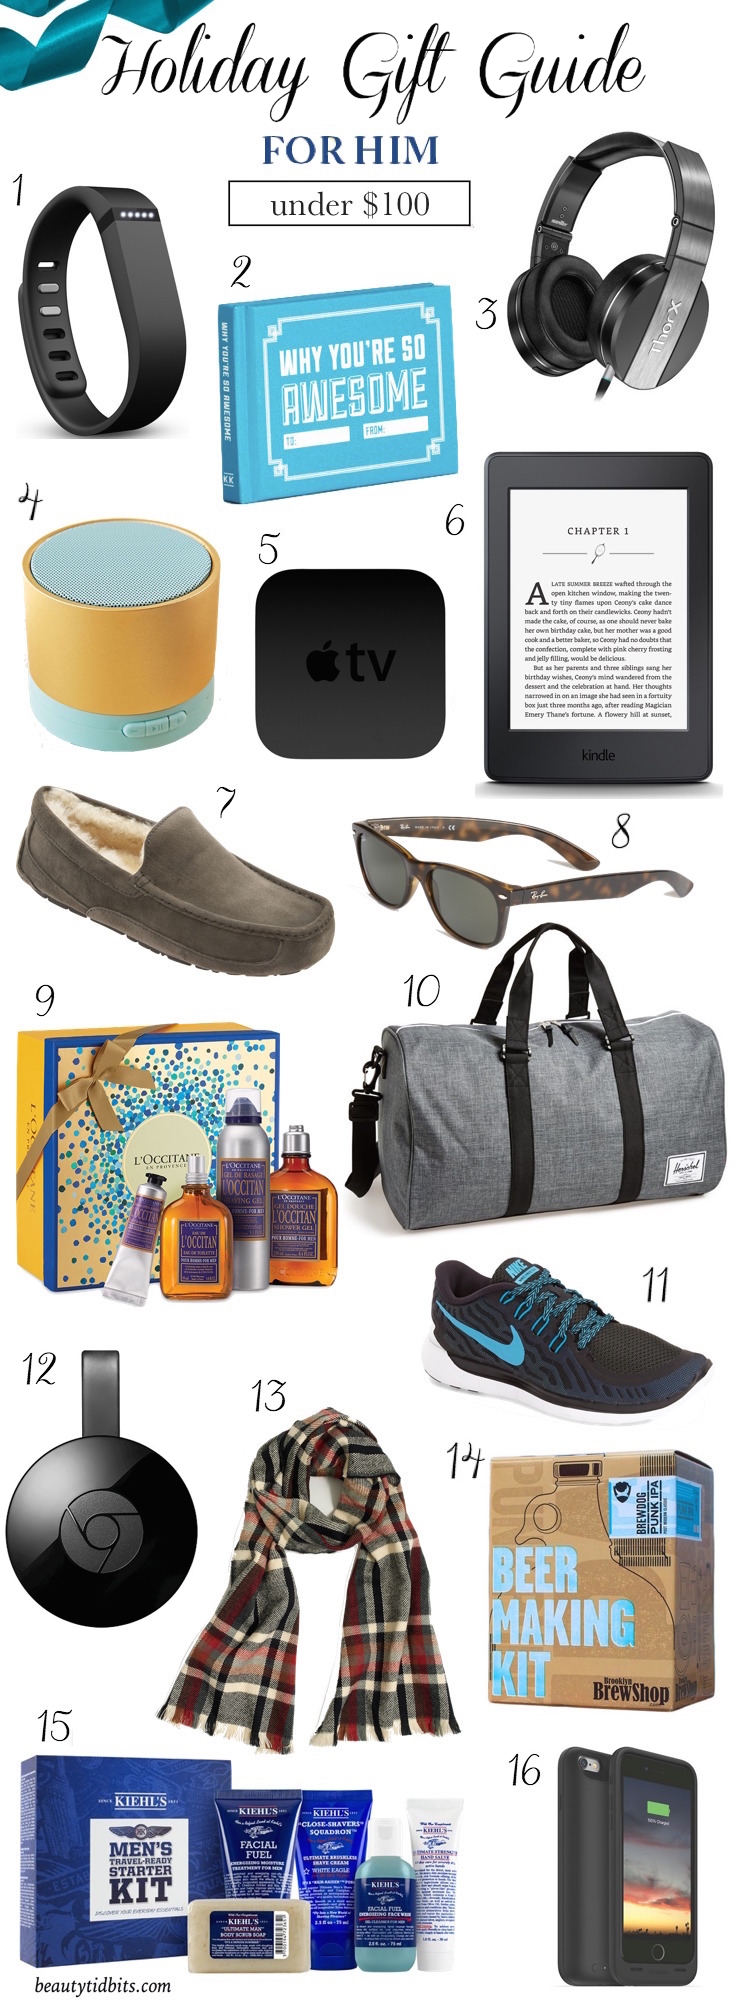 10 Great Gift Ideas For Men Christmas holiday gifts your man will love and actually use holiday list 2022